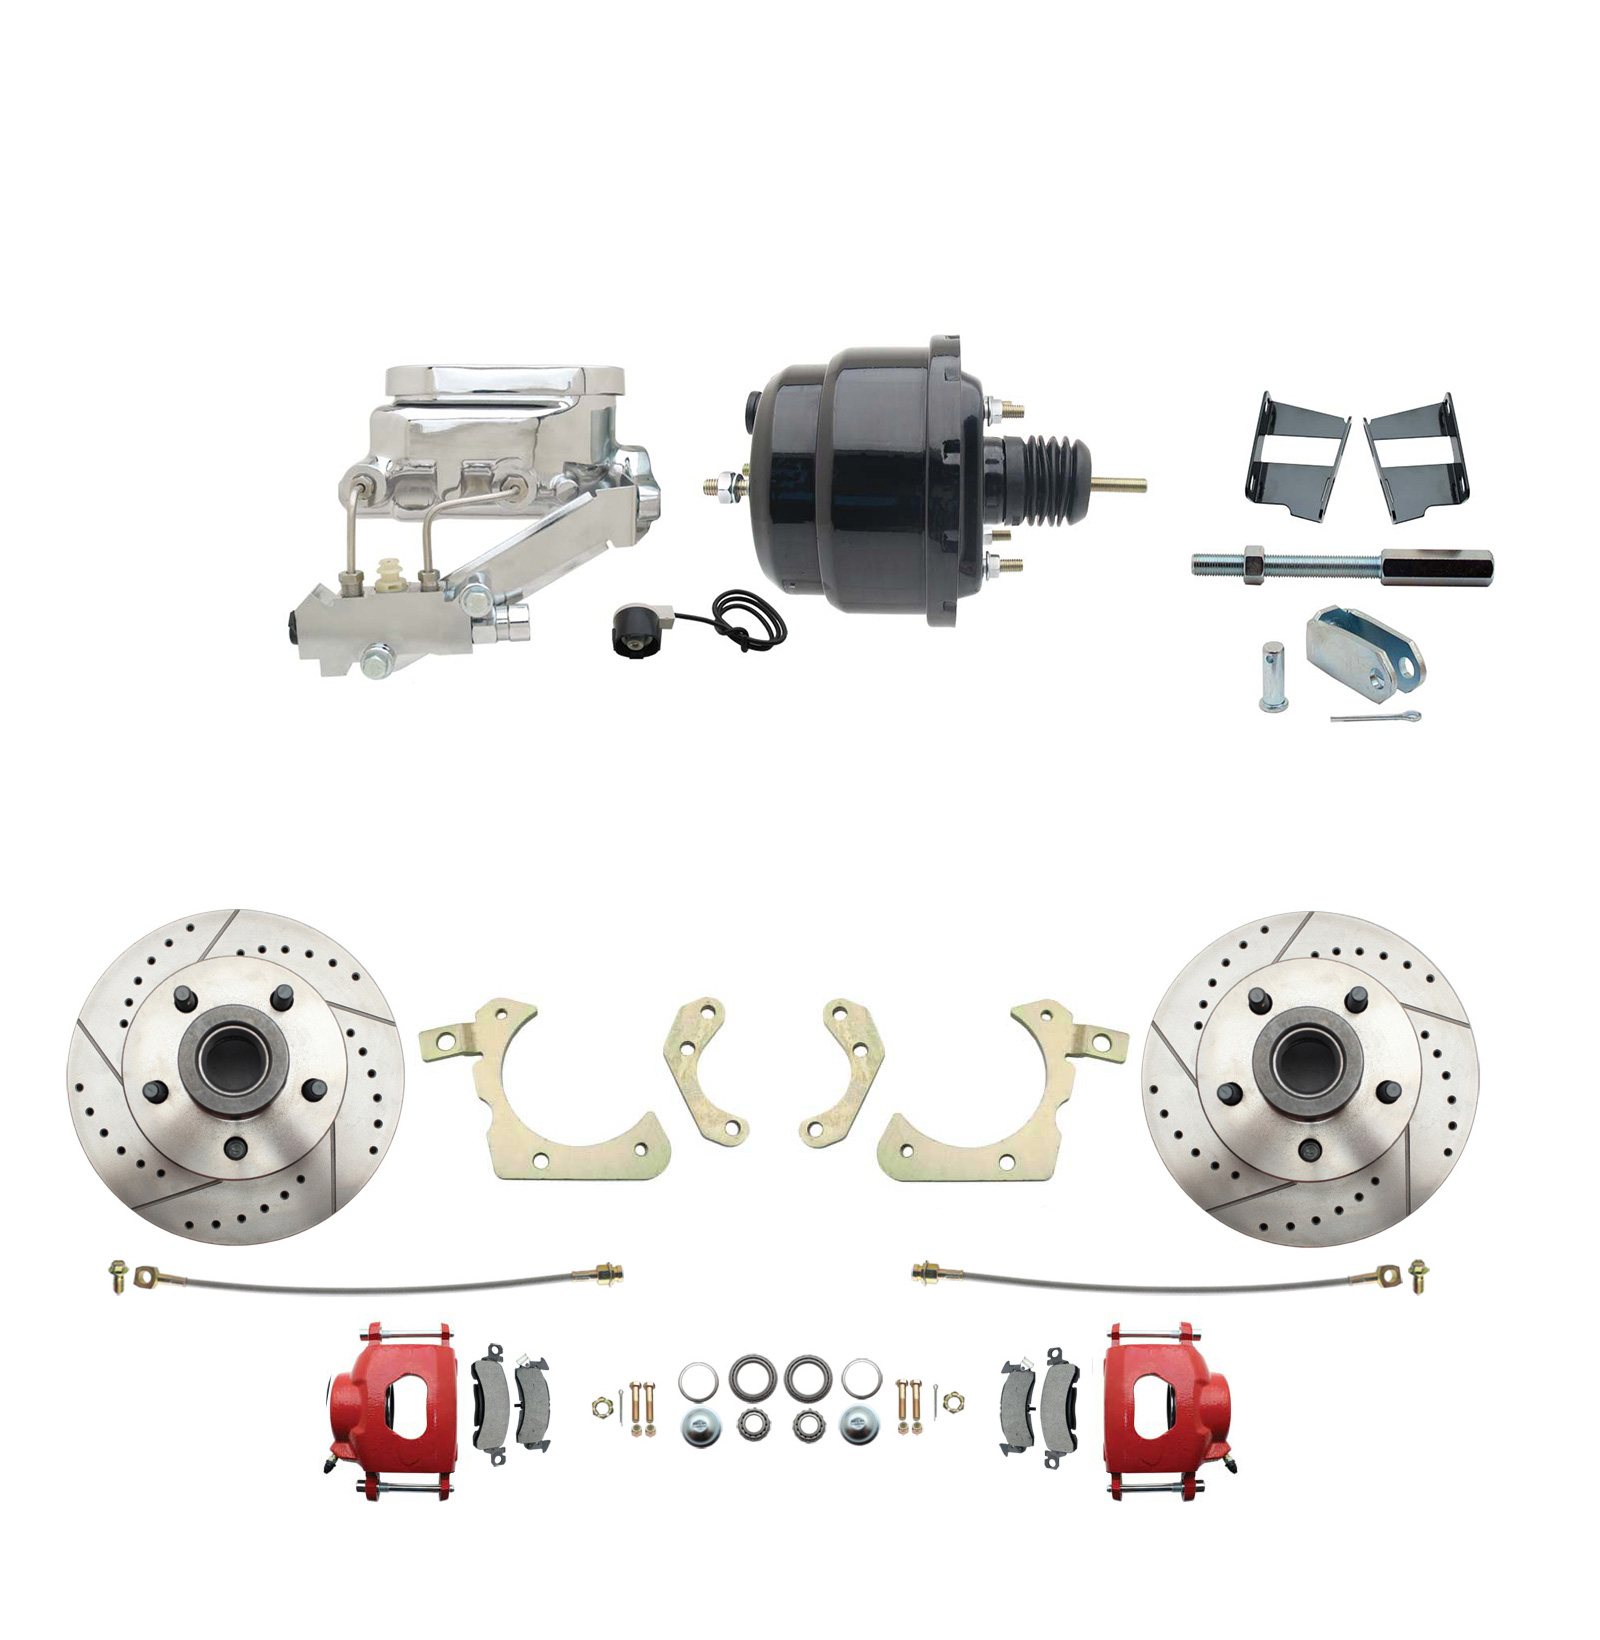 1959-1964 GM Full Size Front Disc Brake Kit Red Powder Coated Calipers Drilled/Slotted Rotors (Impala, Bel Air, Biscayne) & 8 Dual Powder Coated Black Booster Conversion Kit W/ Chrome Flat Top Master Cylinder Left Mount Disc/